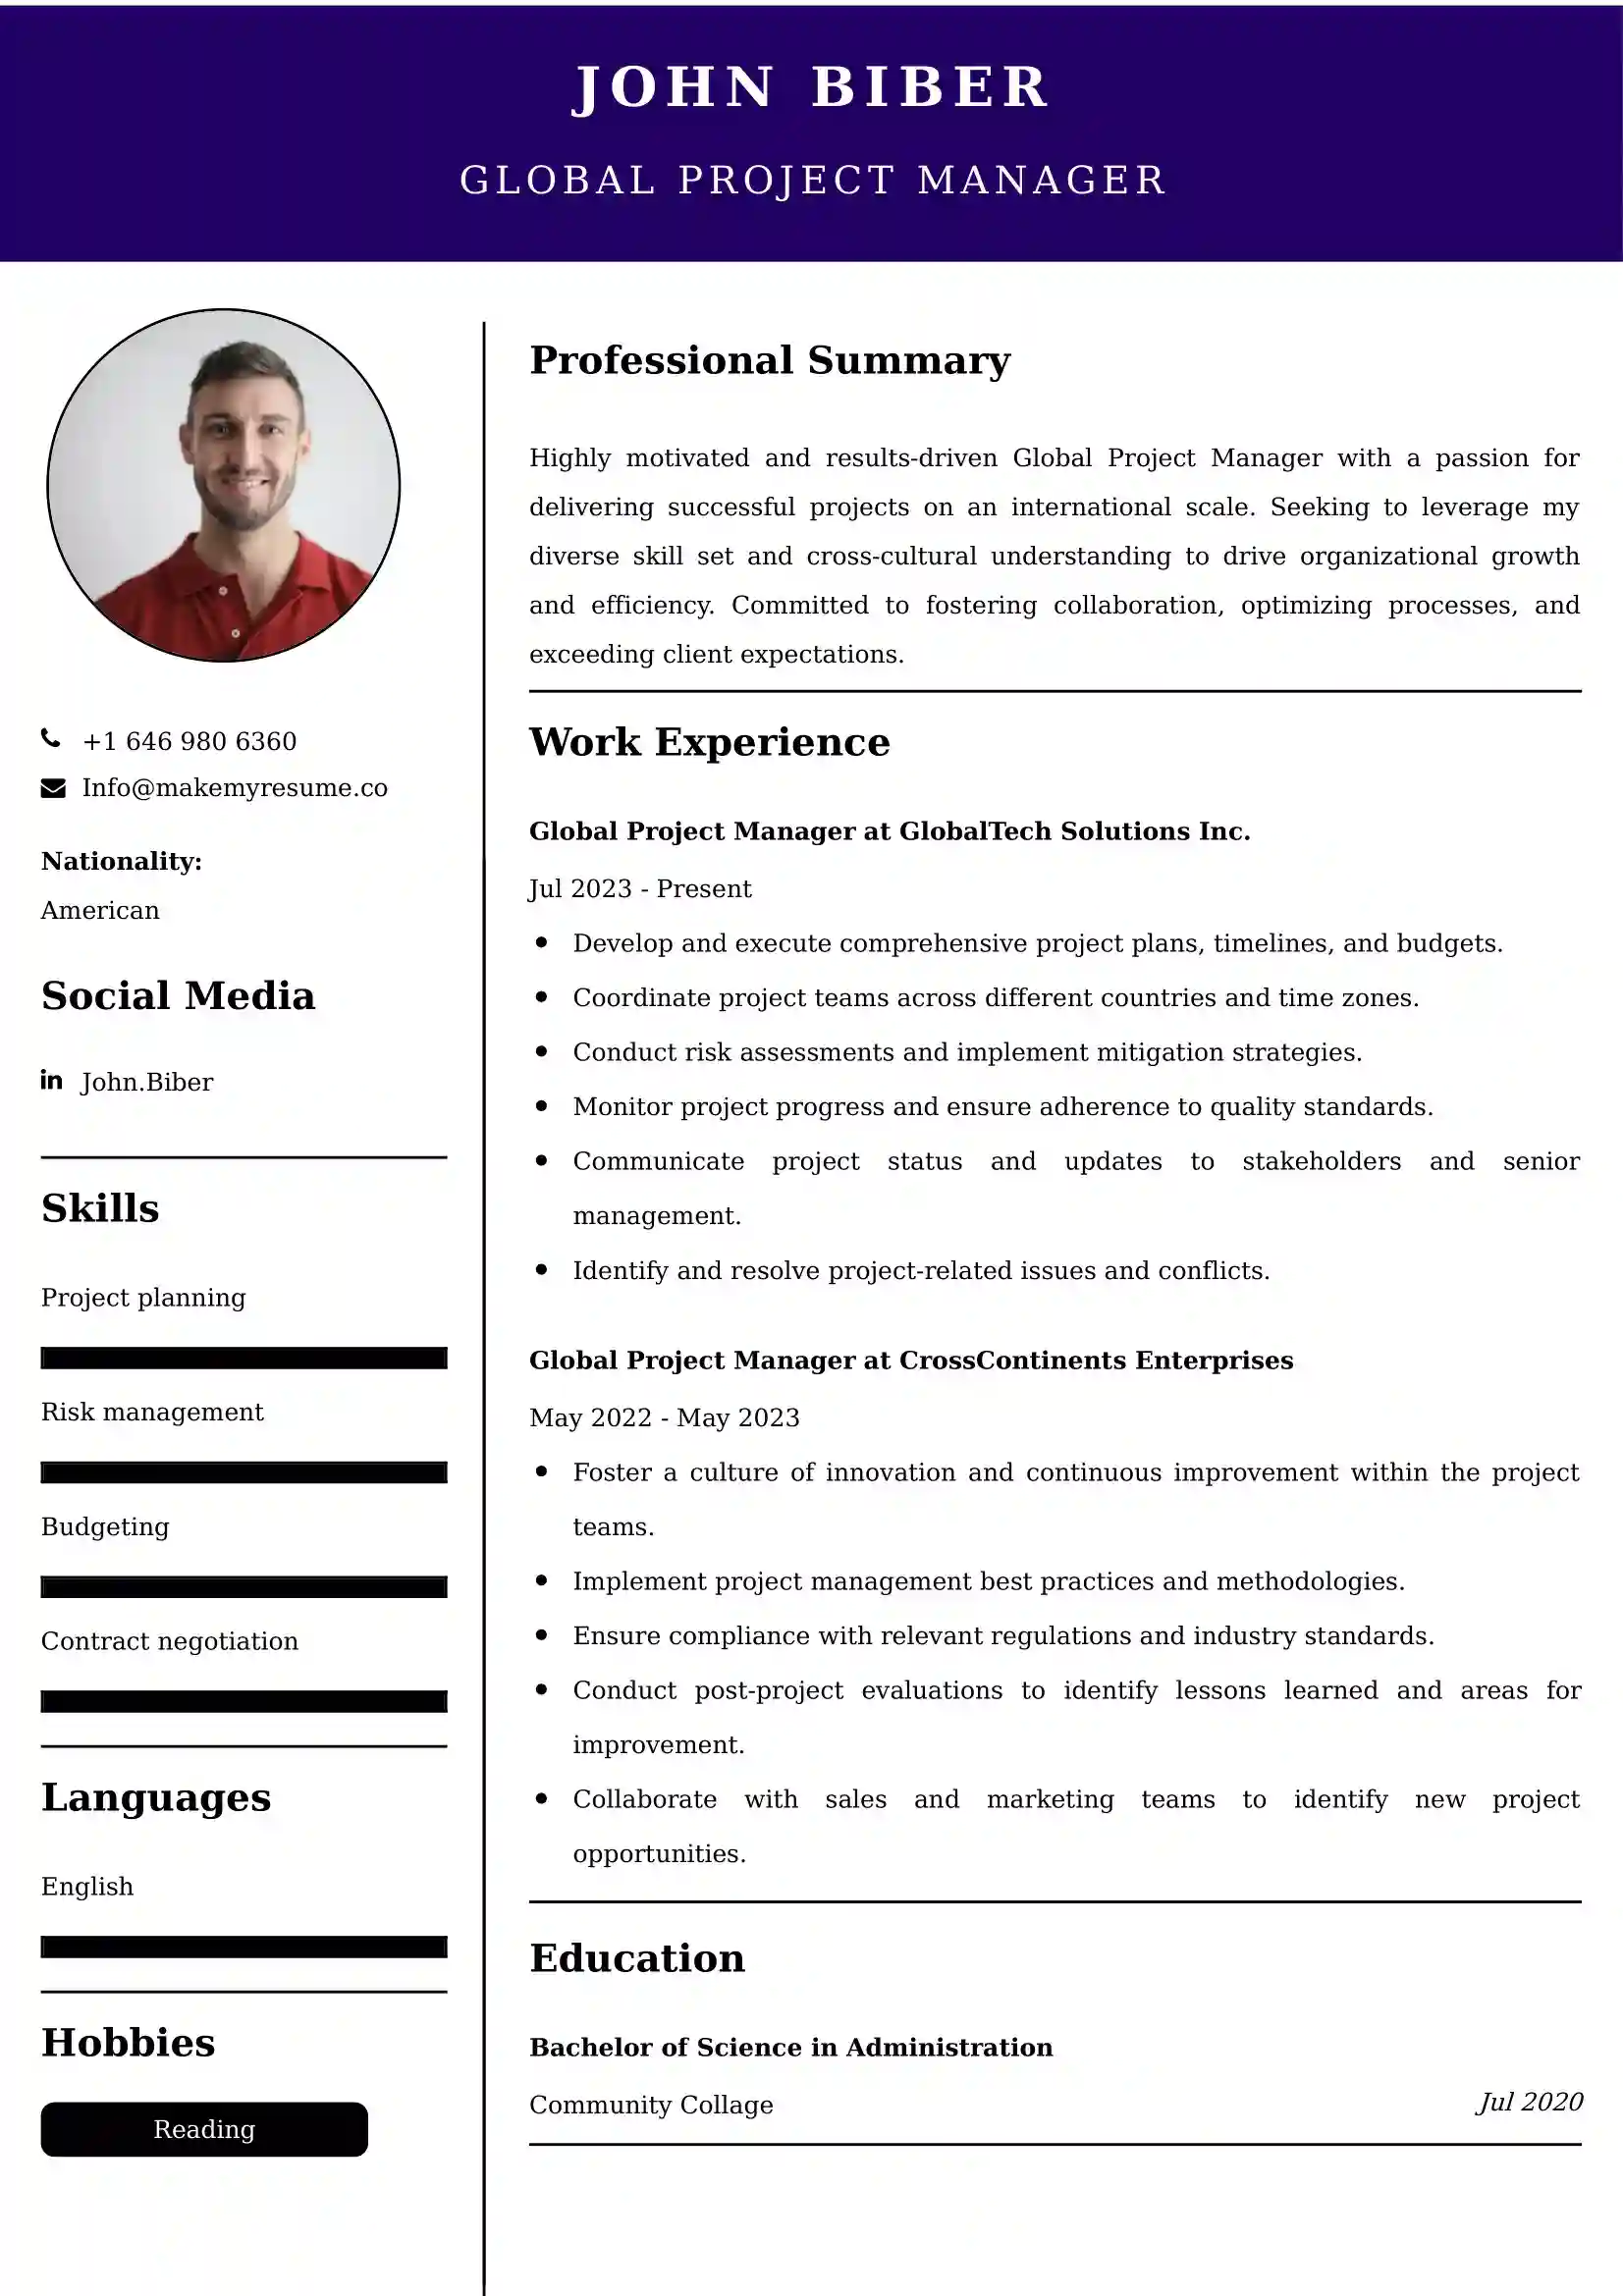 Global Project Manager Resume Examples for UK Jobs - Tips and Guide